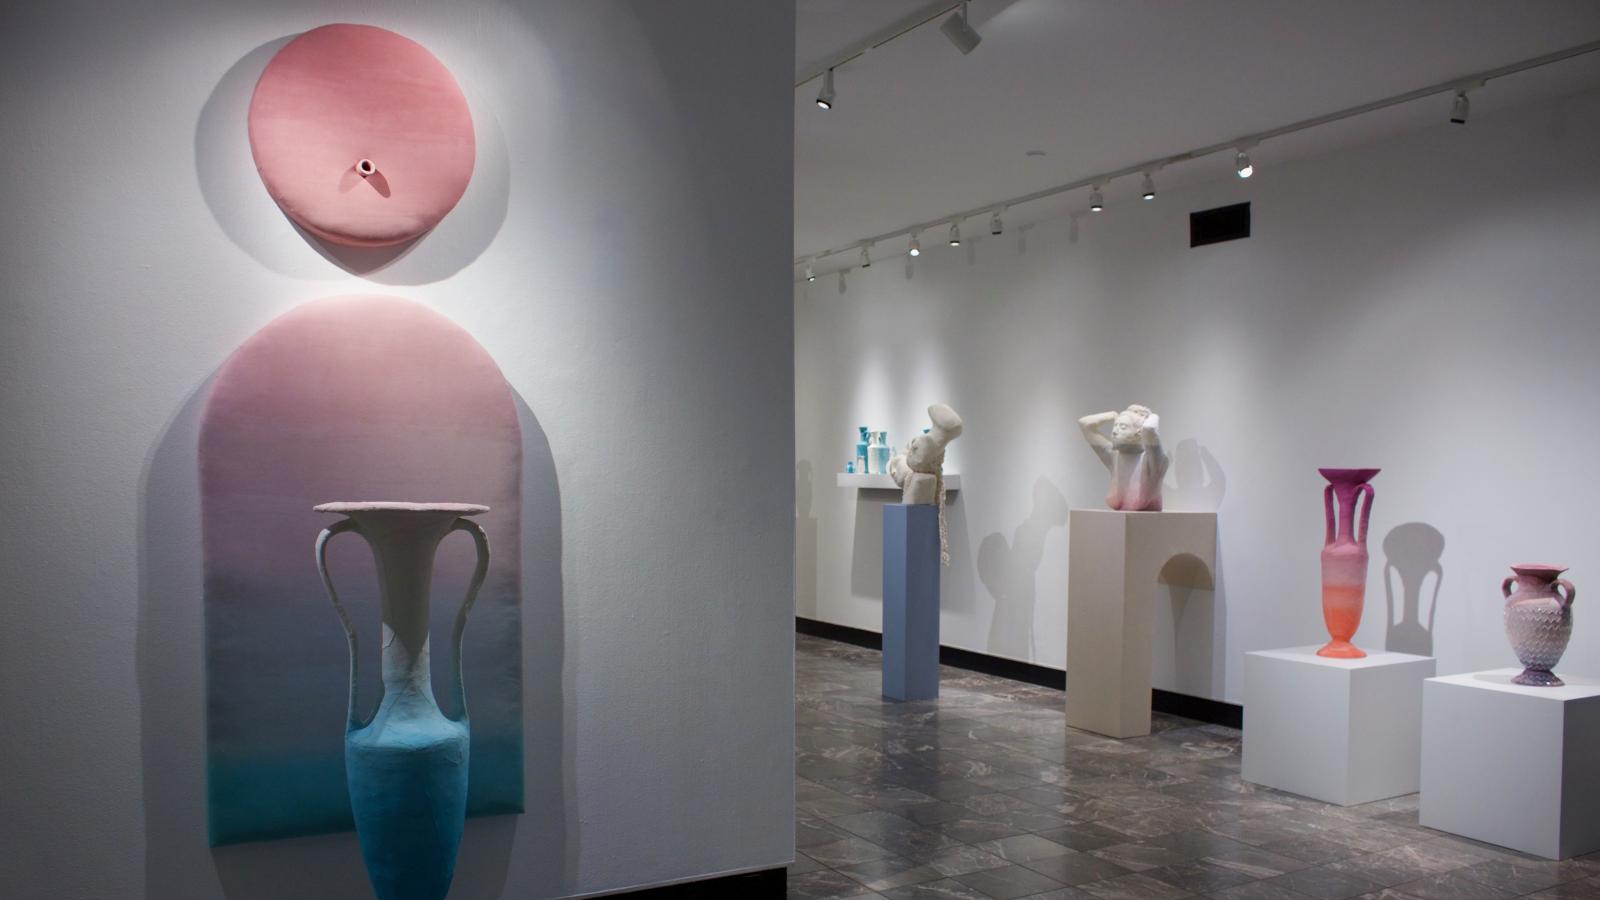 An exhibition filled with Grecian-inspired sculptures